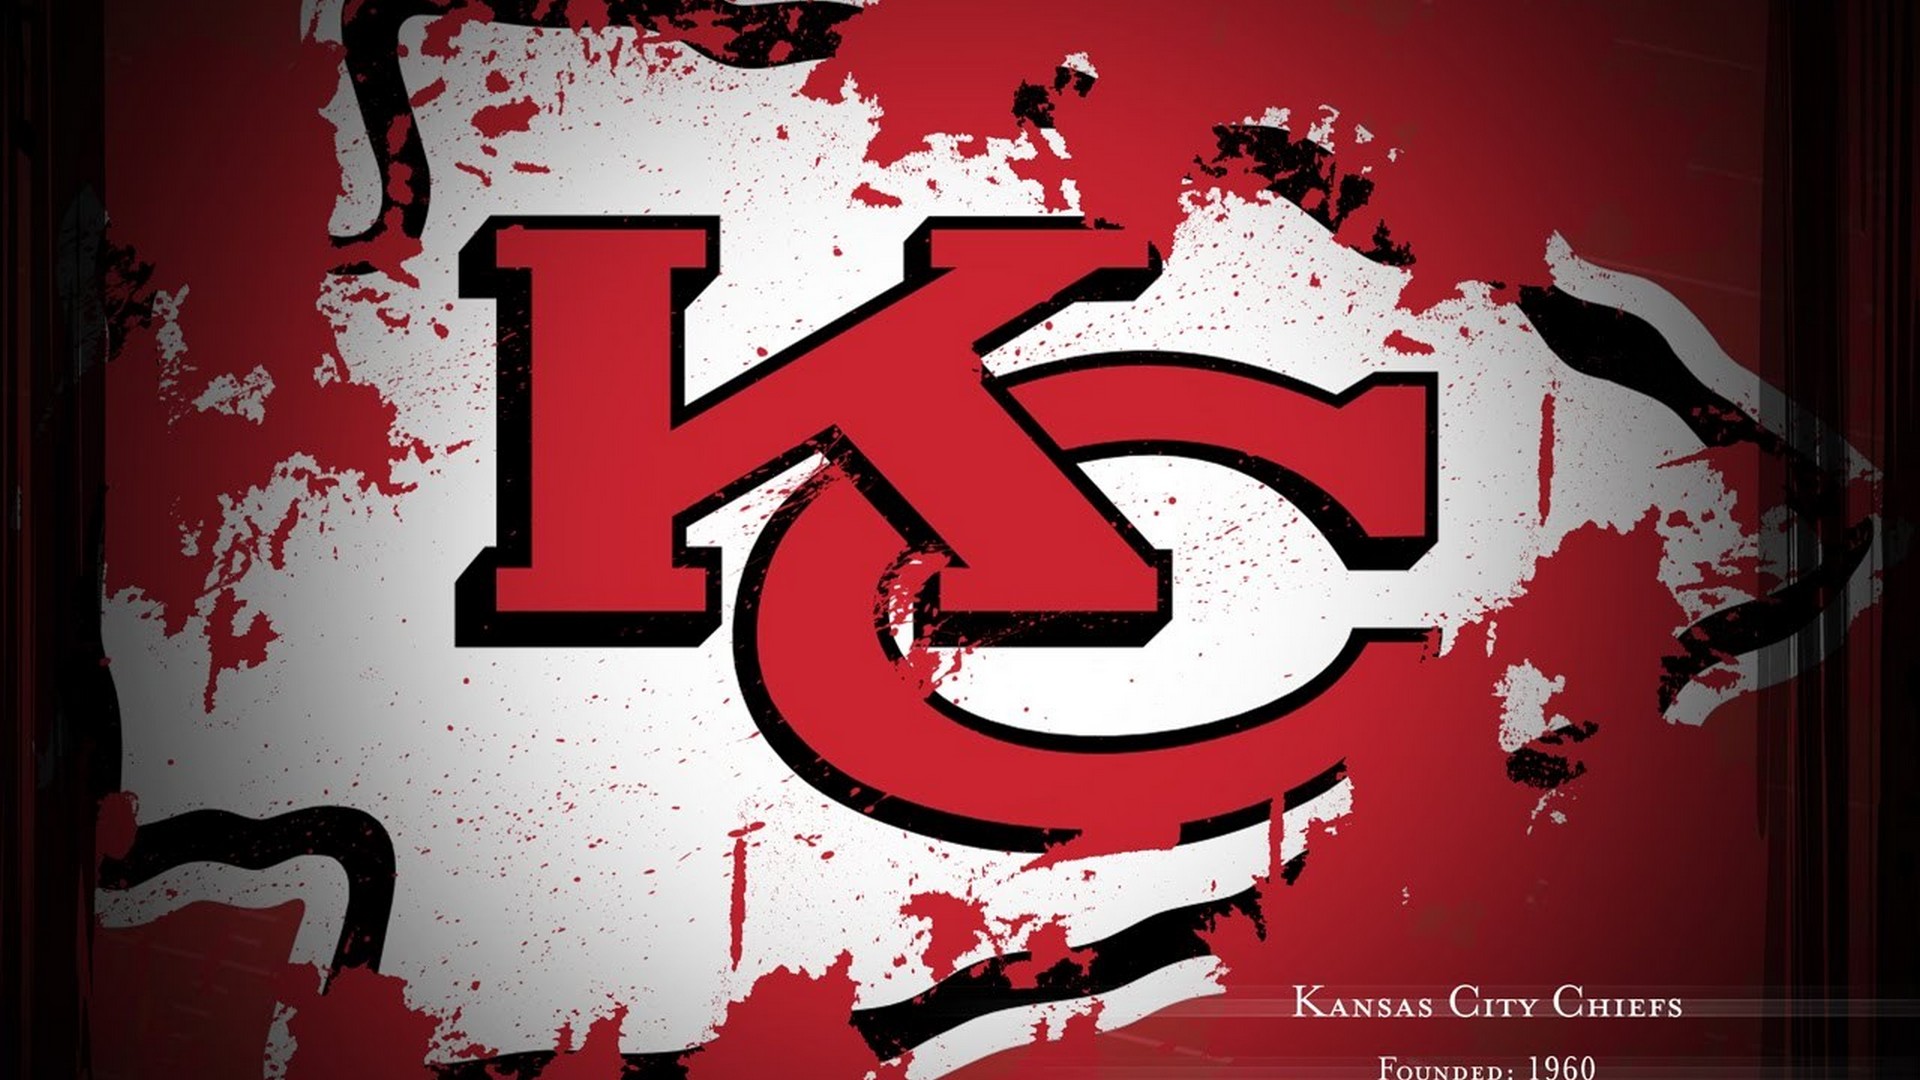 Kansas City Chiefs Desktop Wallpaper With Resolution 1920X1080 pixel. You can make this wallpaper for your Mac or Windows Desktop Background, iPhone, Android or Tablet and another Smartphone device for free